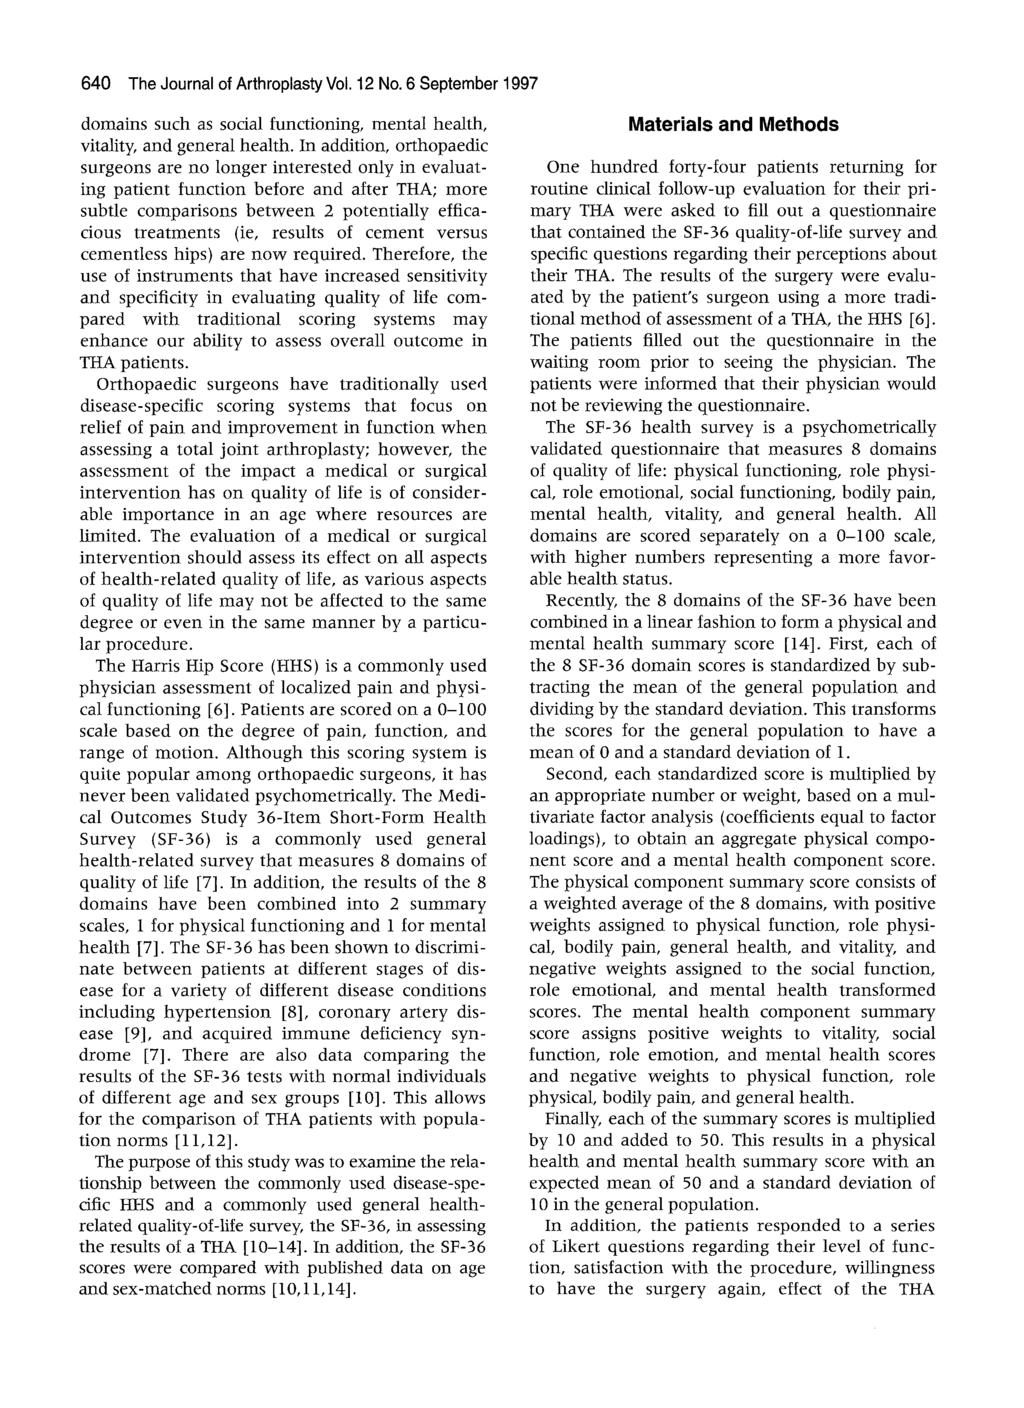 640 The Journal of Arthroplasty Vol. 12 No. 6 September 1997 domains such as social functioning, mental health, vitality, and general health.